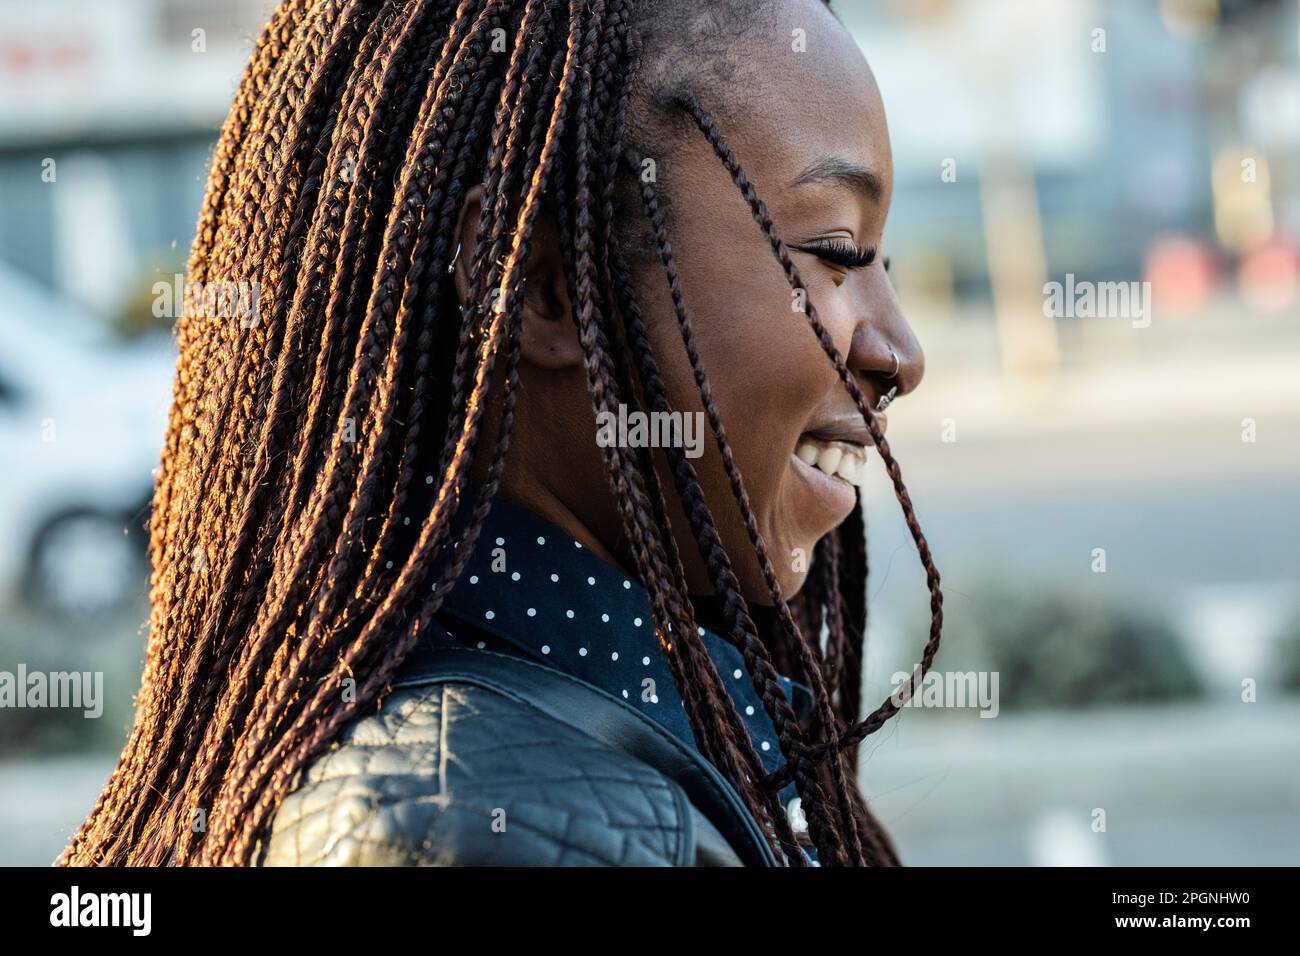 Happy woman with braided hair Stock Photo